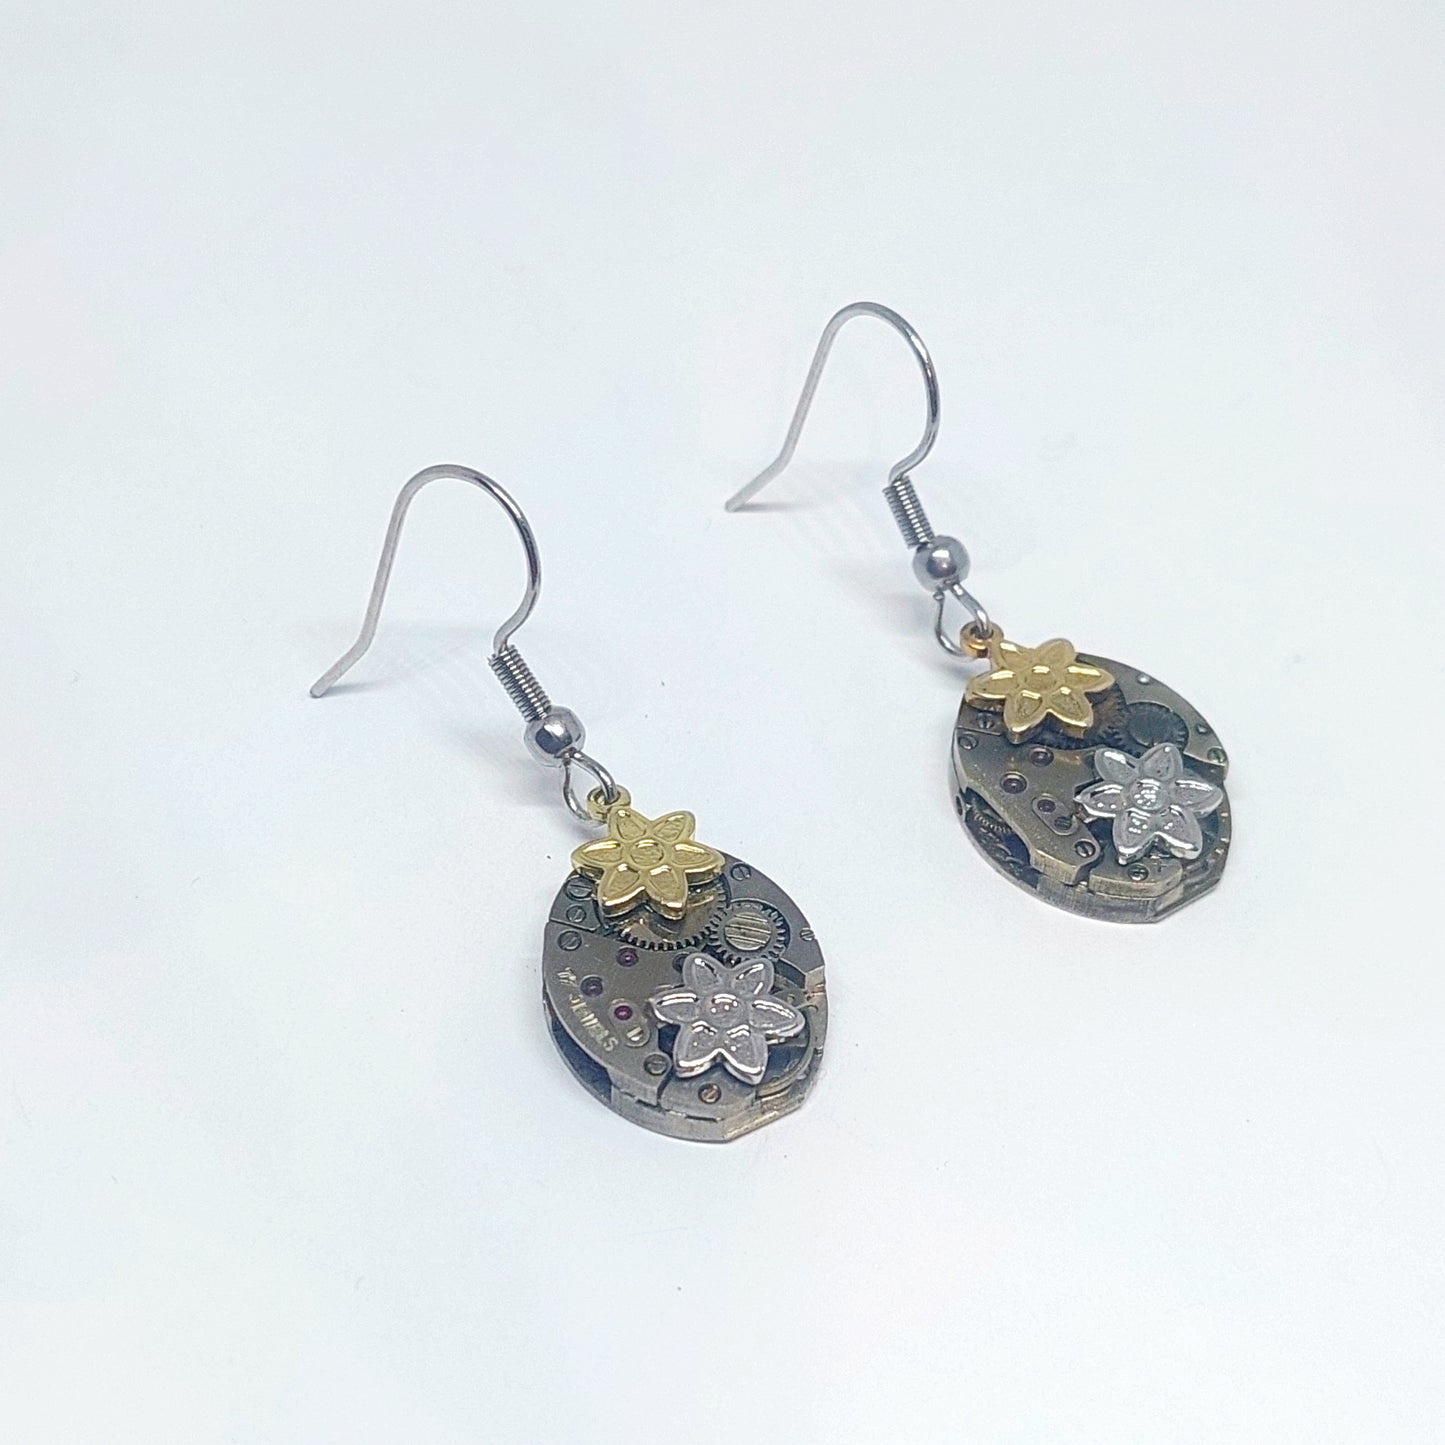 NEW!! Timepiece earrings - mixed metal flowers